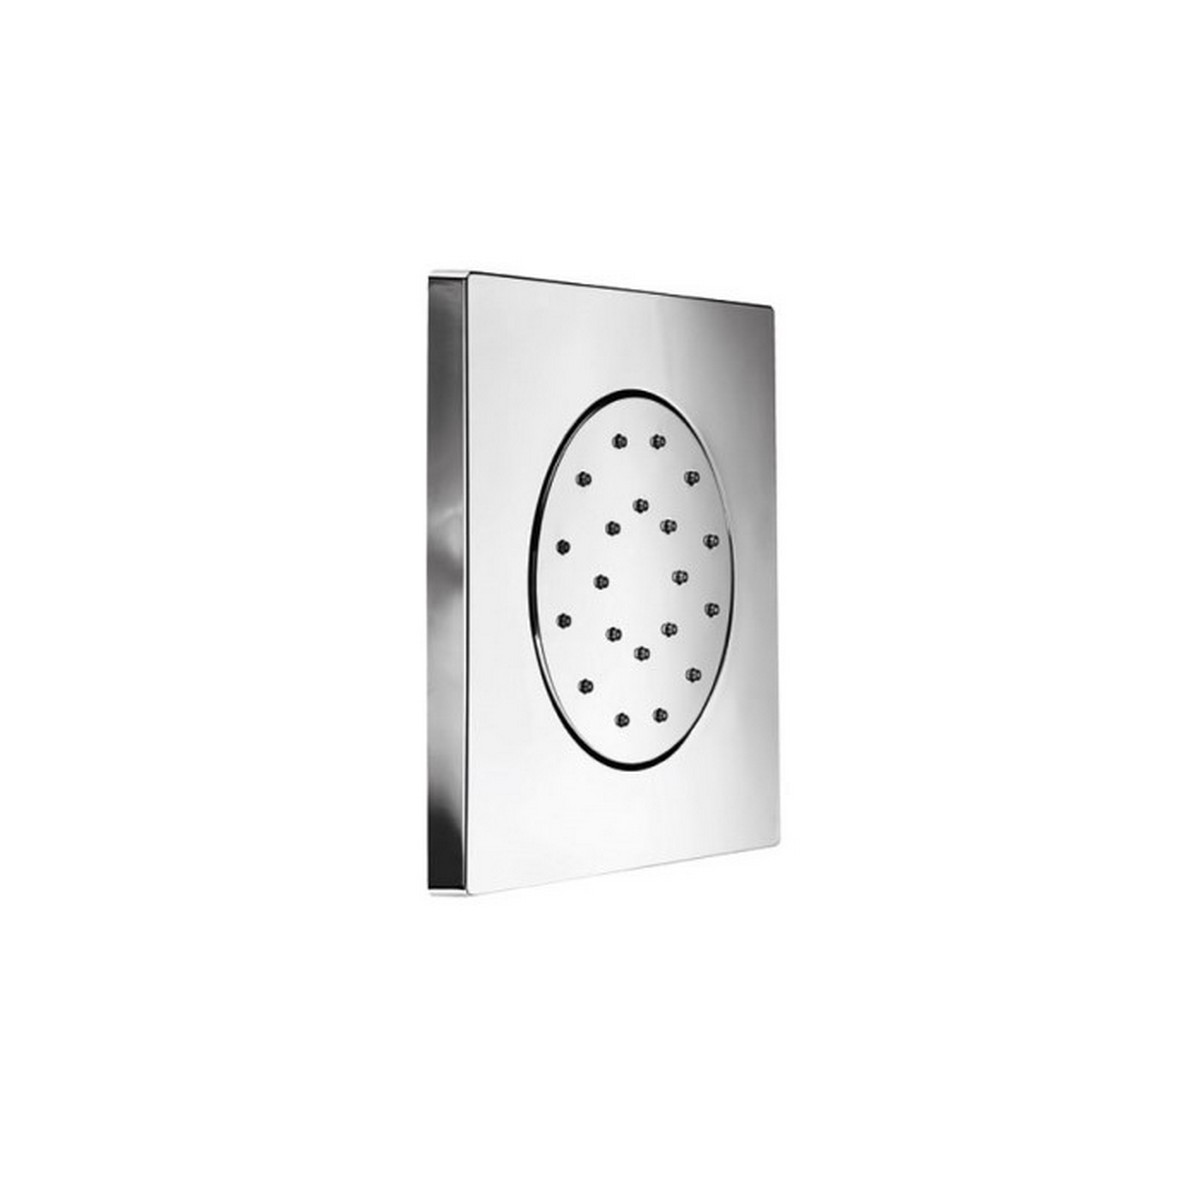 RAIN THERAPY PS AL-044085 4 3/4 INCH WALL MOUNTED BODY JET